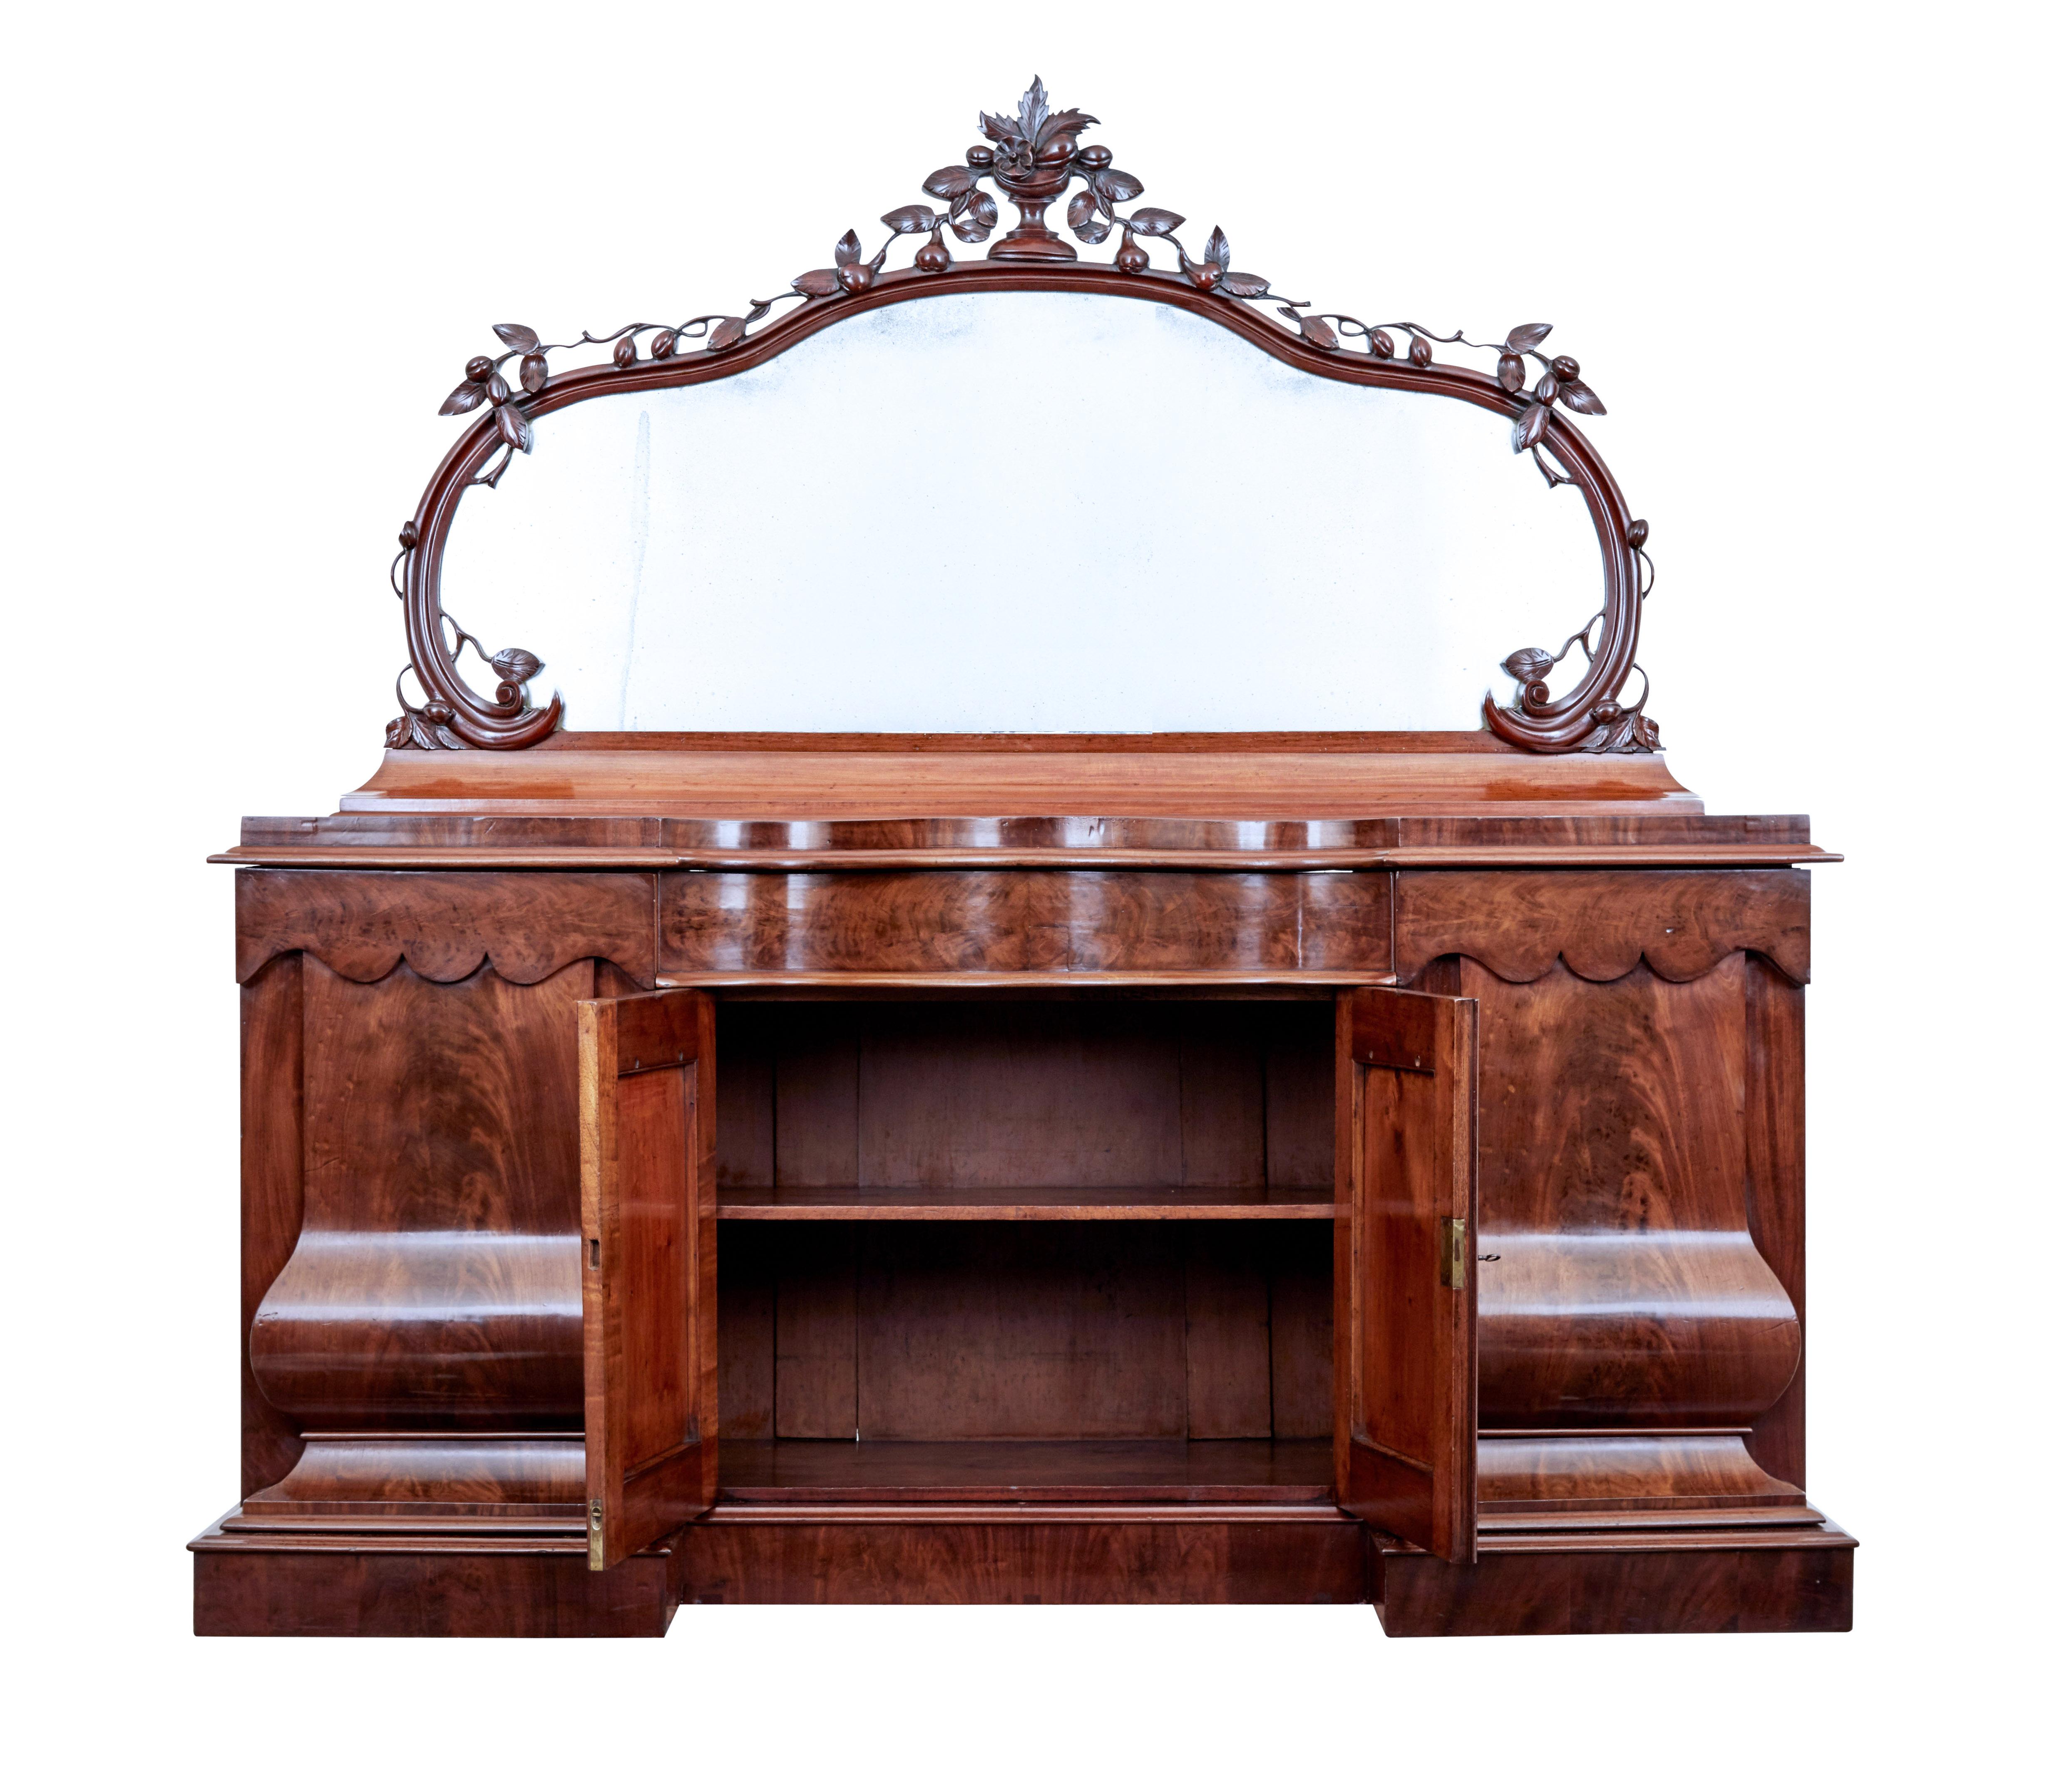 English High Victorian Shaped Flame Mahogany Mirror Topped Sideboard